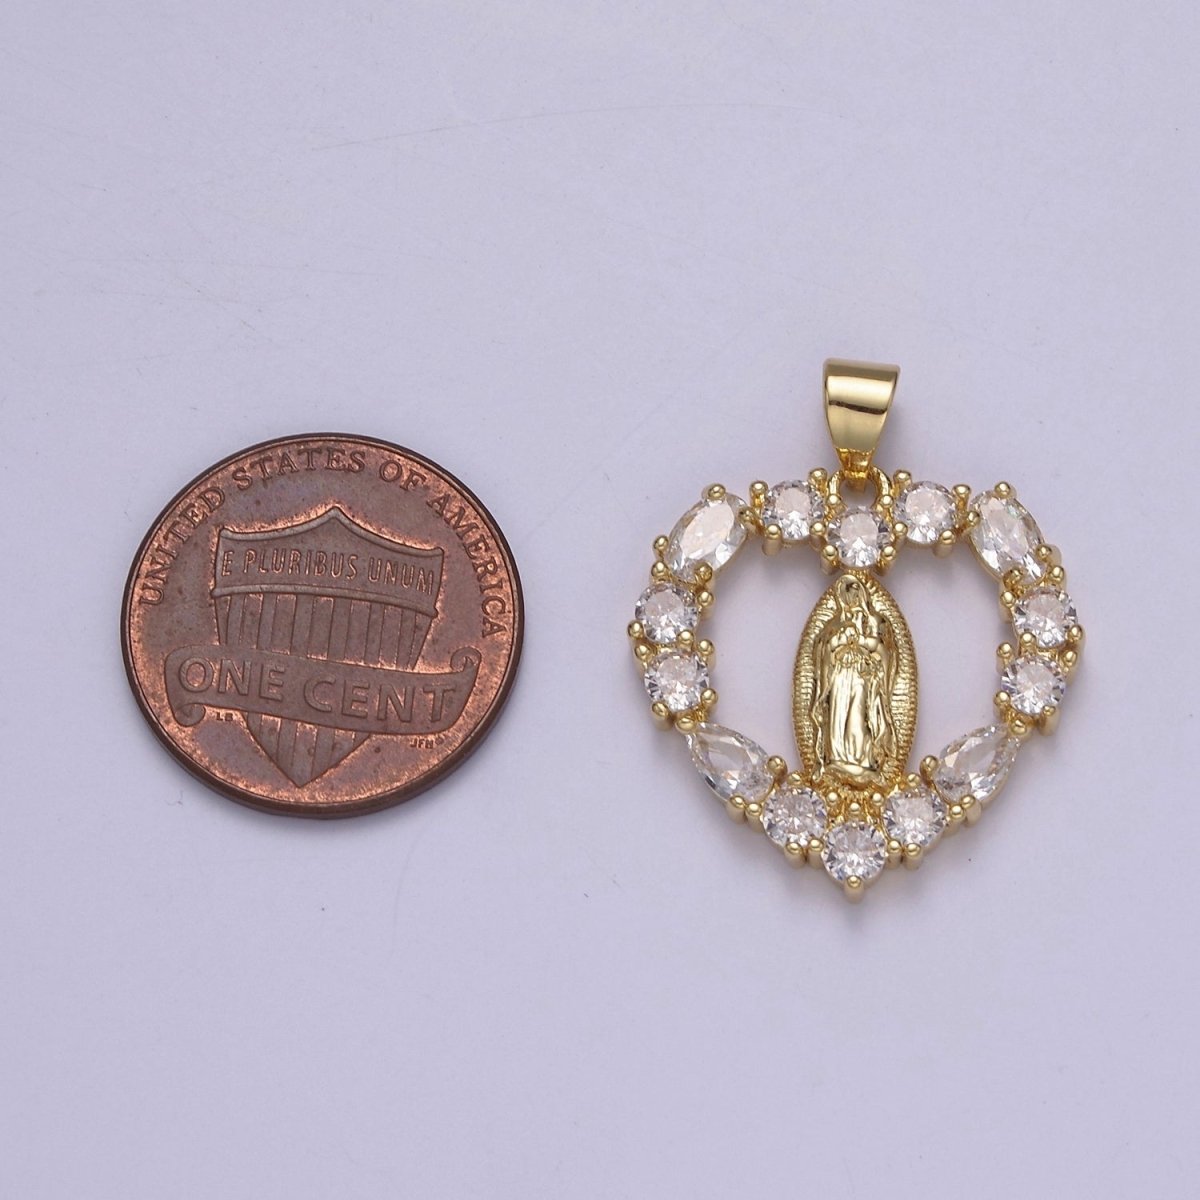 Gold Virgin Mary On Heart Emblem Shape Pendant Religious Charm Lady Guadalupe Pave Pendant, Dainty Gold Charm J-357 - DLUXCA